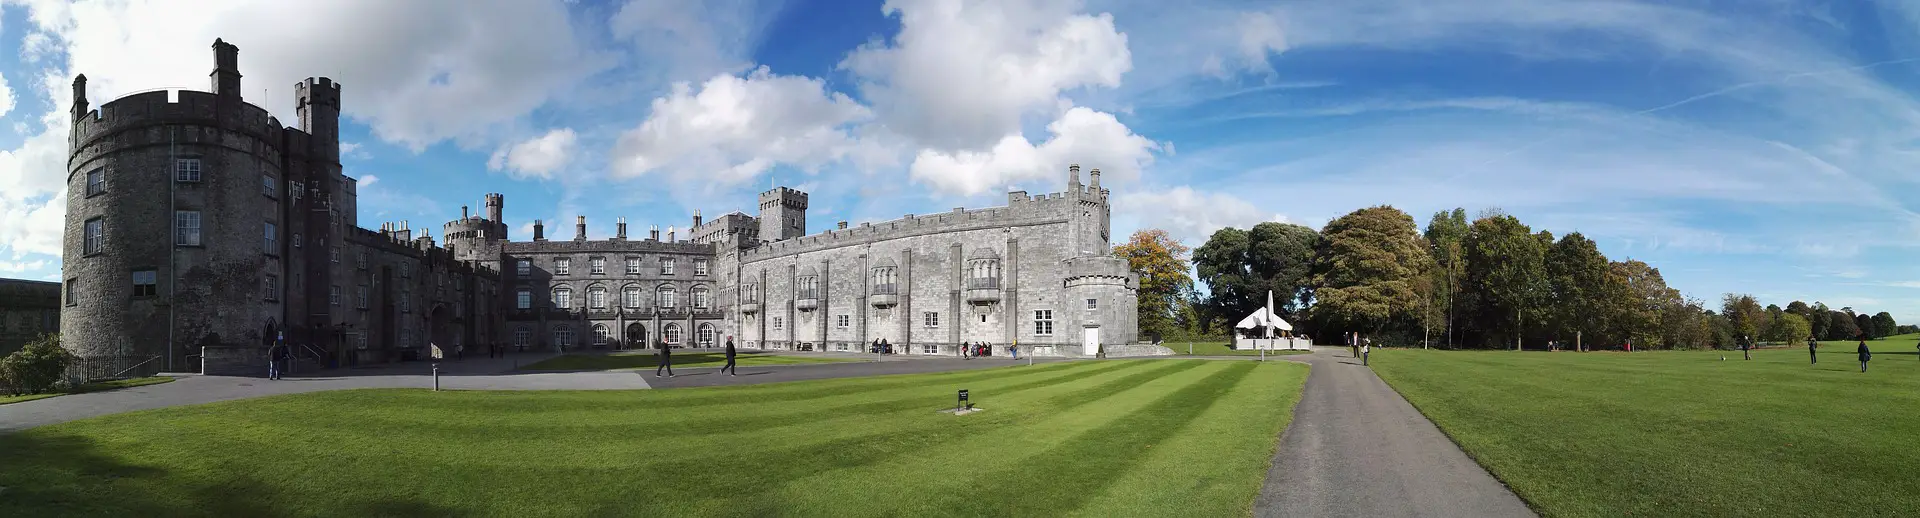 How to See Kilkenny